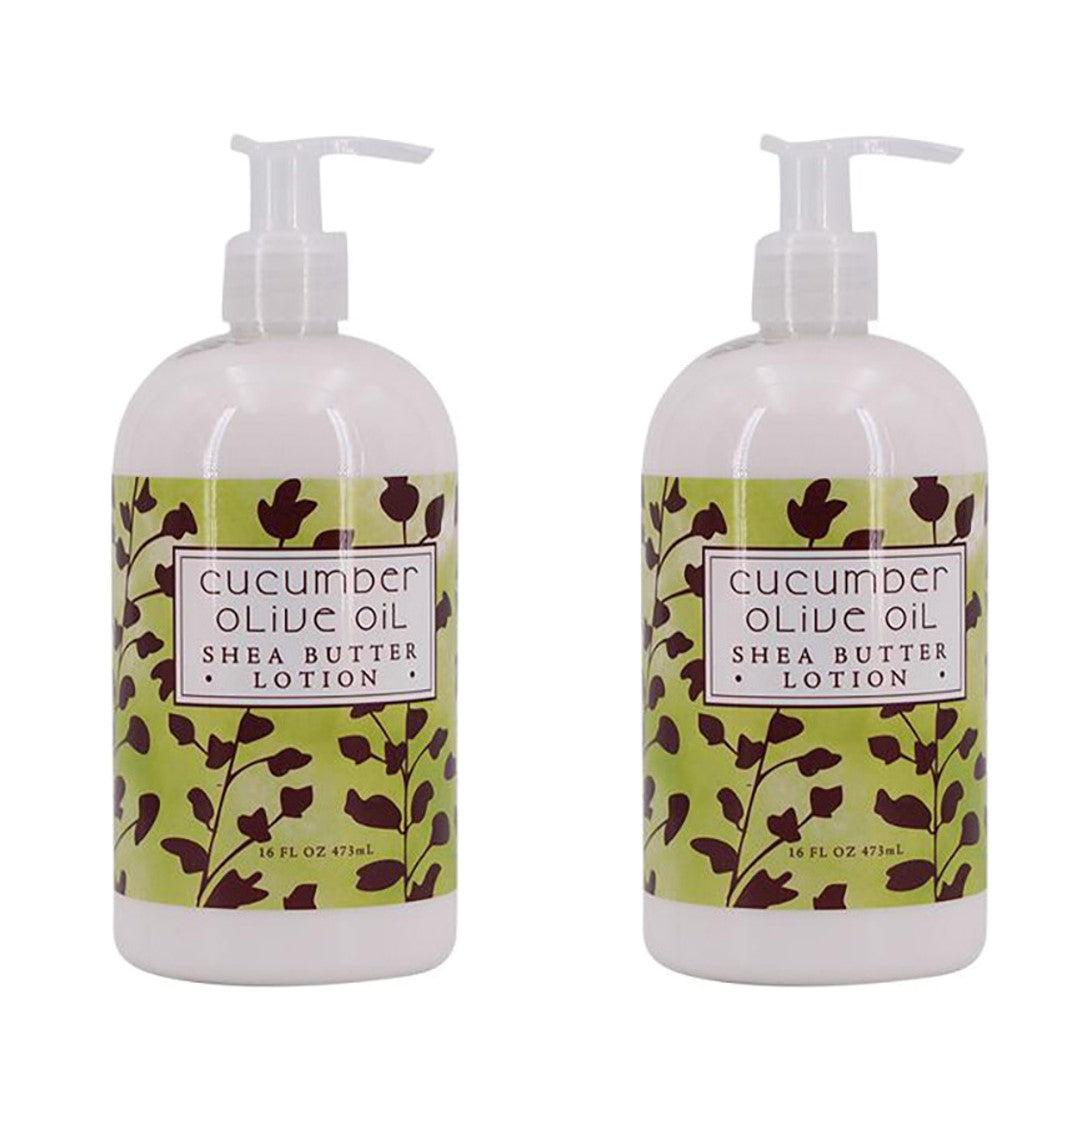 Cucumber Olive Oil Scented Shea Butter Lotion 16 oz (2 Pack)